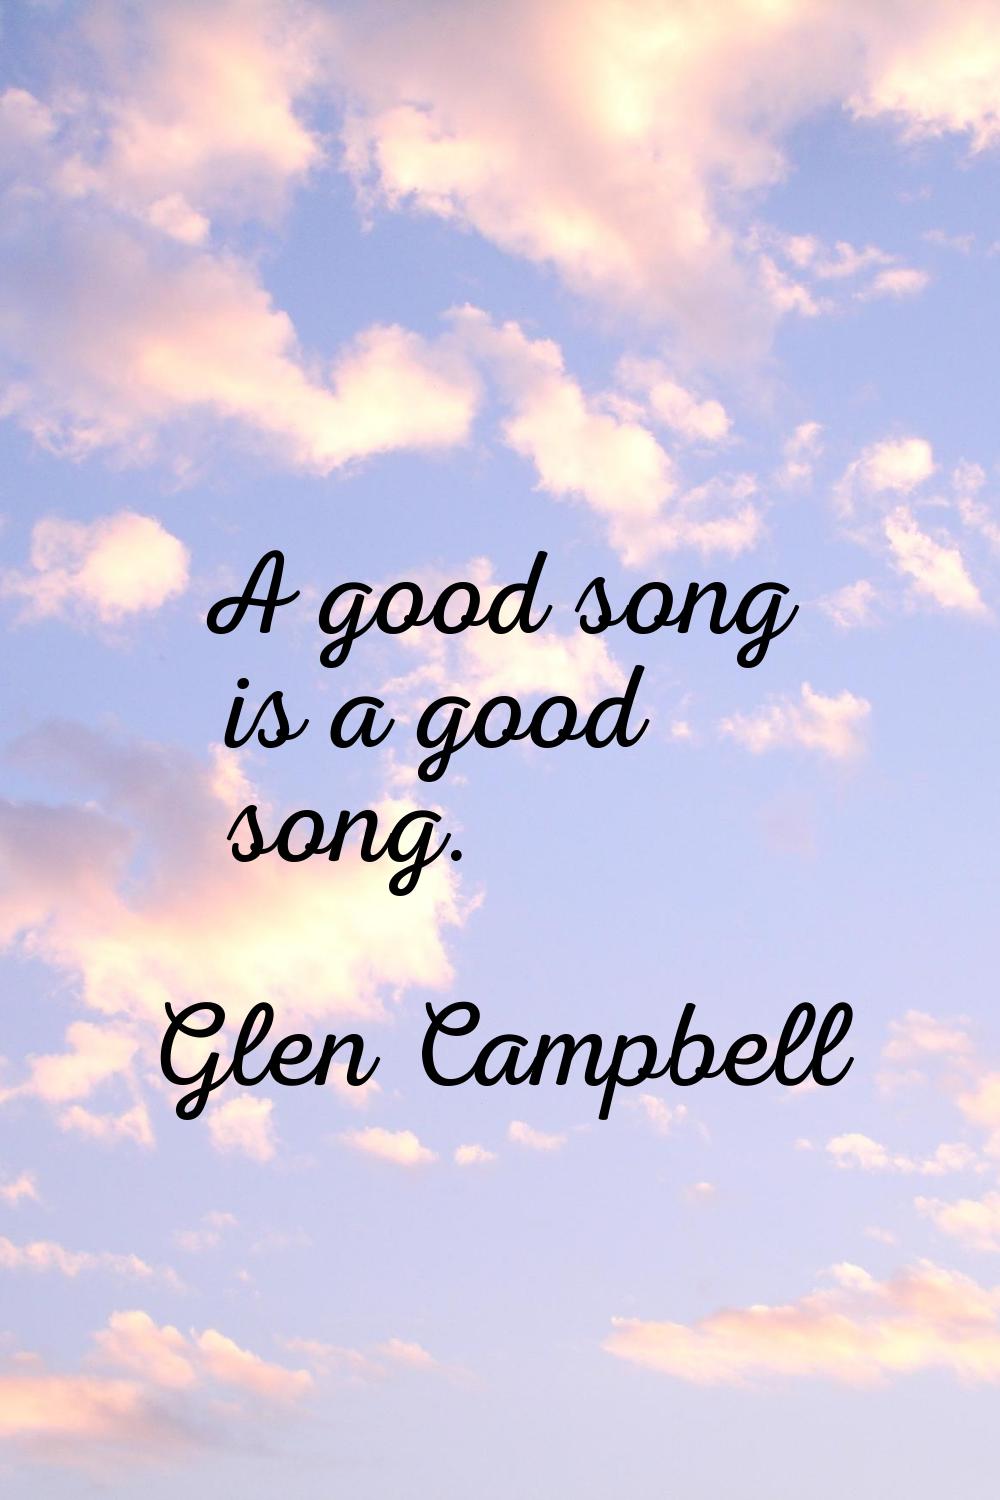 A good song is a good song.